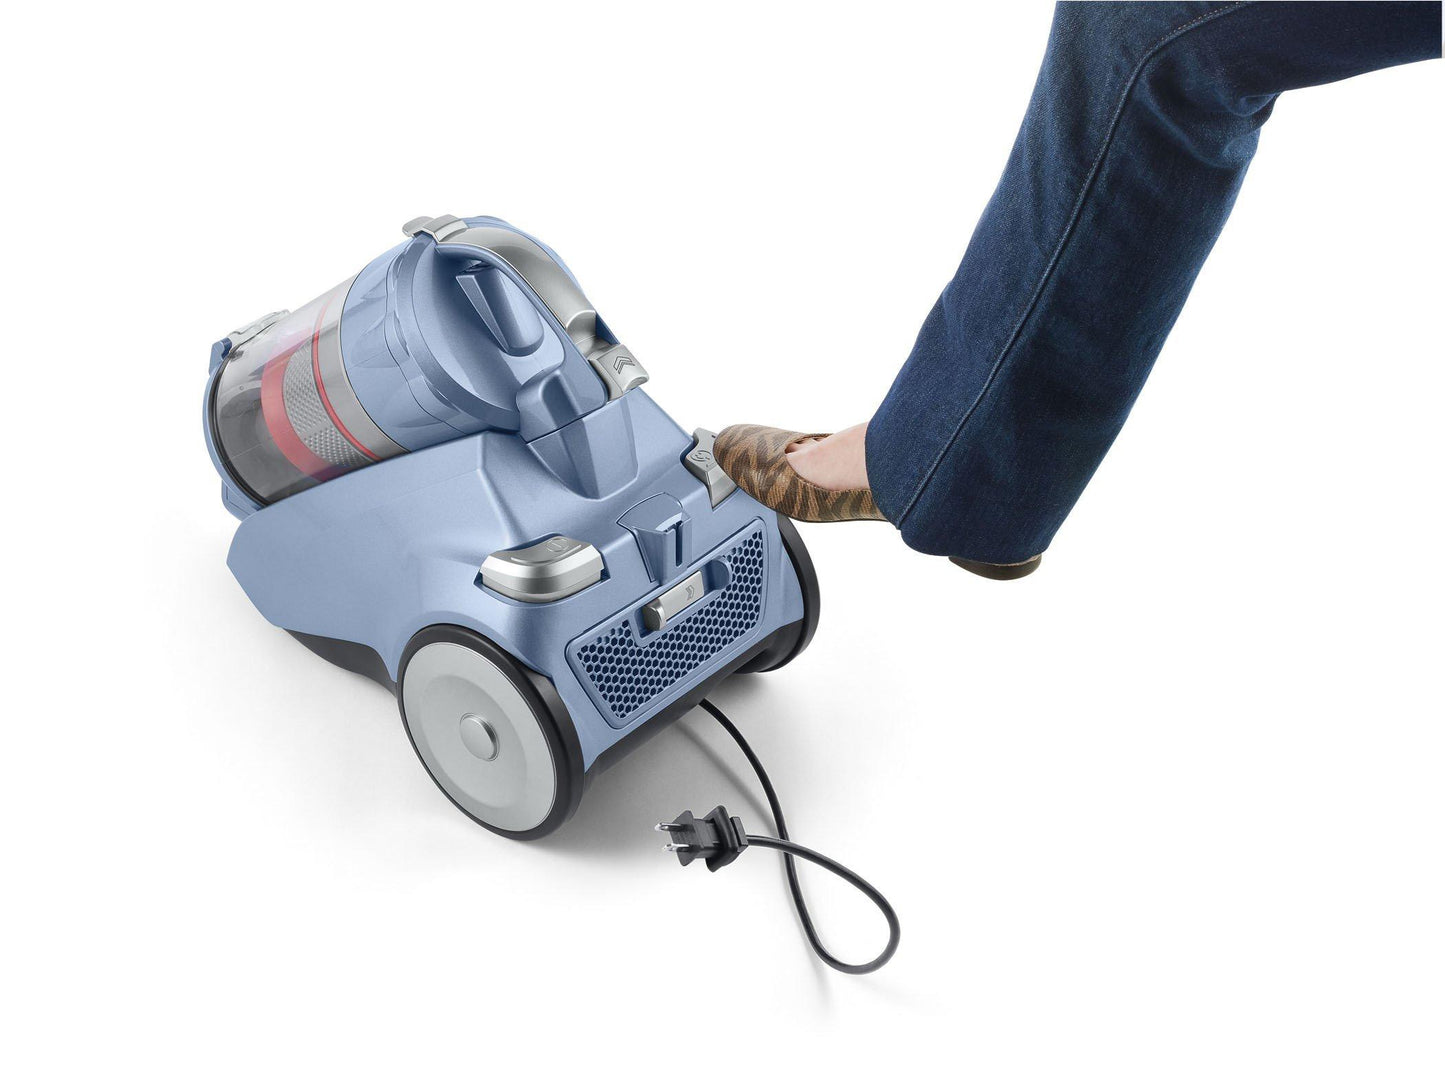 Reconditioned Multi-Cyclonic Canister Vacuum